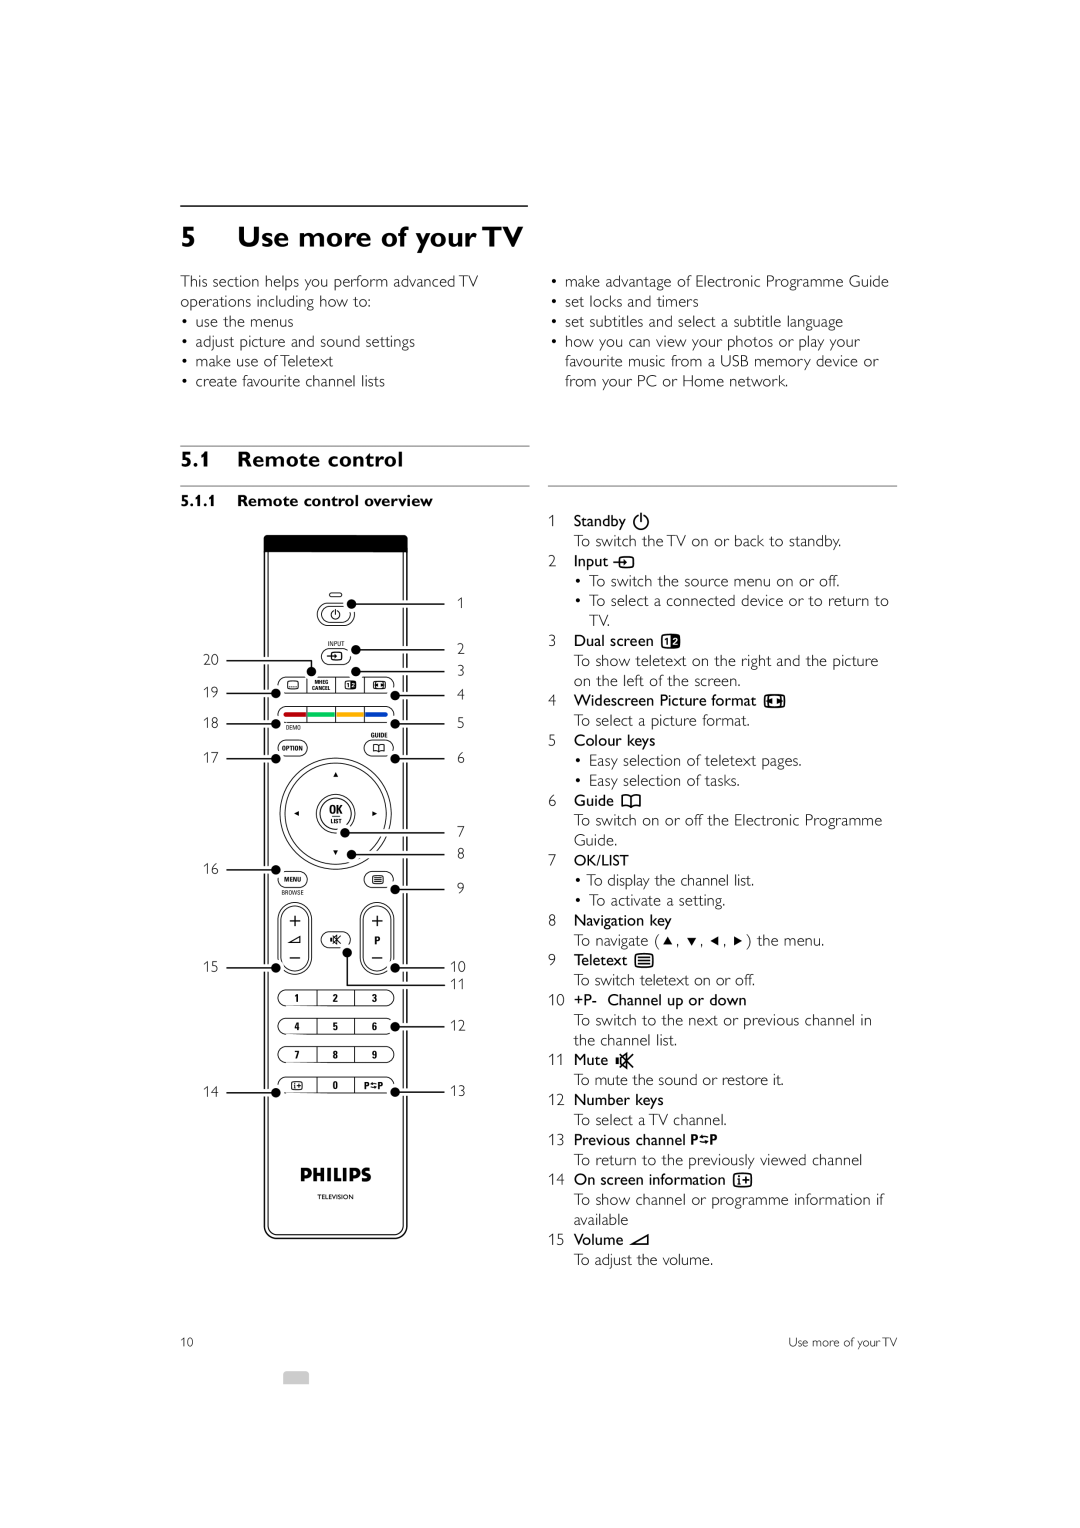 Philips 42PFL7423, 42PFL7433 manual Use more of your TV, Remote control overview 